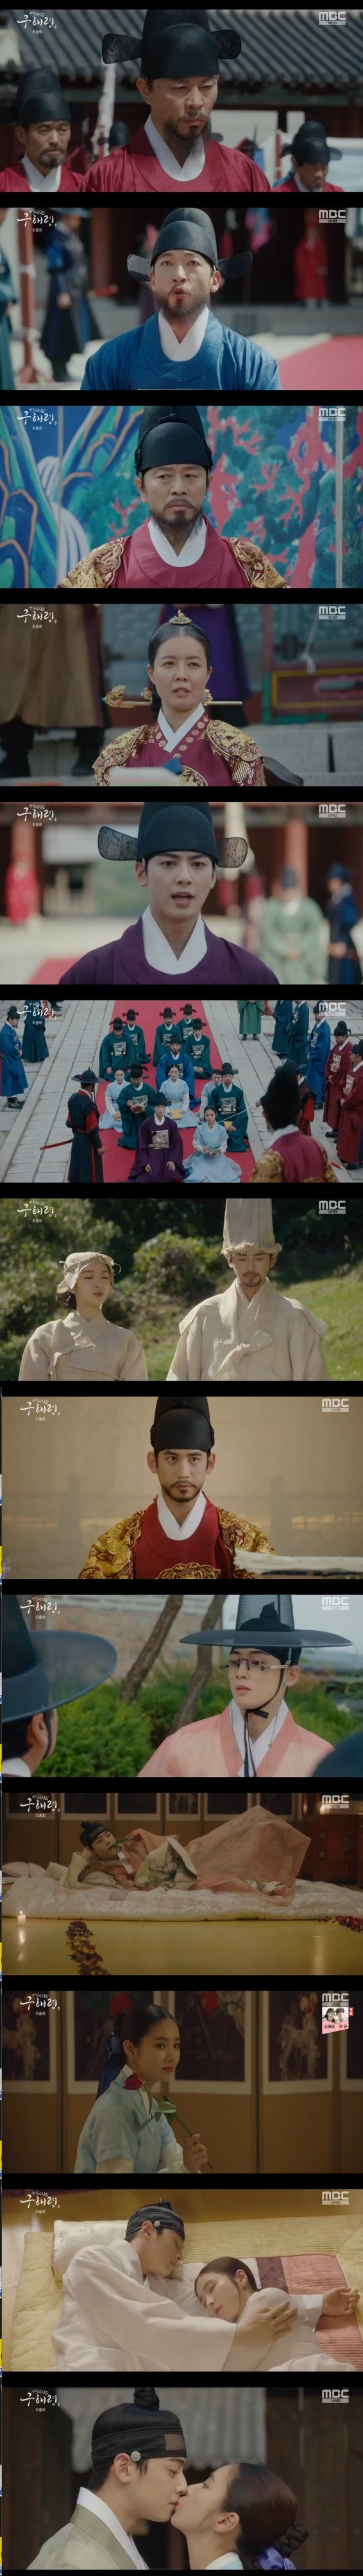 In the MBC drama The New Entrepreneur Rookie Historian Goo Hae-ryung, which was broadcast on the afternoon of the 26th, Daewon Daegun Yirim (Cha Eun-woo) gave up Wang Yu and had a happy day with Ada Lovelace Rookie Historian Goo Hae-ryung (Shin Se-kyung).It was revealed that the death of King Jong-ju Lee (Yoon Jong-hoon) was killed by Min Ik-pyeong (Choi Duk-moon) 20 years ago.The center of this situation is Daewon, and before the 20th anniversary celebration of the 20th anniversary of the reign of the Lord, Daewon Daegun should disappear from the world, Min said.Min Ik-pyeong later warned King Lee Tae (Kim Min-sang) and Crown Prince Lee Jin (Park Ki-woong) that Do not forget that I made a decision 20 years ago that you are here.Lee Jin was troubled by the days he had with Irim.The next day, a banquet was held and Koo Jae-kyung (Fairy Hwan) came out. All of the things, including the abolition and Seoraewon, were the frame of Min-ik-pyeong.He added, Please lie to the king and kill the people who have committed the royal family.When Min-pyeong did not budge, the contrast (Kim Yeo-jin) shouted, If it is a sin to believe the words of that person, rule me with a crime. Then Min-pyeong said, Now do you reveal your true color?Mama had been in love with Seoraewon for a while, and she had to pretend that she did not know how long she wanted to put Daewon Daegun on the king. At this point, Irim appeared. I am no longer a Taoist. Irim, the son of this man. For the past 20 years, you have been able to kill me.But why did not you do it? Is not it because the King knew that the opposition was wrong? Is not it because of the guilt that I killed my innocent brother and took Wang Yu?The officers should step back, or they will be choked here, Itae warned.Rookie Historian Goo Hae-ryung moved and sat down next to the rim.Rookie Historian Goo Hae-ryung said: Your Grace, even if you cut me, the essay does not stop.I will have another officer sitting in this place where I died, and if I kill that officer, another officer will sit. He can never stop even if you take all the paper and brushes.Thats how its going to be transmitted from peoples mouths to their mouths - thats the power of truth, he said.Min Woo-won (Lee Ji-hoon) also came out and shouted, Our officers can never step down. Then Min Ik-pyeong told Lee, Your Grace, these are the people who have been intimidated.Dont hesitate to take your life right away, he said.Watching the whole situation, Lee Jin ordered, Get that knife. Then, to the king, True loyalties do not block the eyes and ears of the king.All who harm the King, the country, and the people are left-handed, he said.He knelt down and stressed, Please listen to the request of the Dowon army and the officers, if anyone is framed, please restore your identity, and you must correct everything that happened at that time.Irim then went to the contrast and declared, Get out of the great army, Wang Yu is not my place; I want to live as a normal person now, as myself.After all, Min Ik-pyeong paid the price: Three years later, Min U-won returned to the presbytery; Lee Jin, not Irim, sat down at Wang Yu.Irim went around the country and returned to Hanyang.Lee Rim, who visited Rookie Historian Goo Hae-ryung, re-confirmed each others love and spent the night together in a romantic atmosphere.Rookie Historian Goo Hae-ryung kissed Lee Lim before work and smiled happily, saying, It seems like Haru will be strong today.Meanwhile, New Entrance Rookie Historian Goo Hae-ryung is a drama about the first problematic Ada Lovelace () Rookie Historian Goo Hae-ryung of Joseon and the Phil full romance annals of Prince Irim, the anti-war mother solo, which was first broadcast on July 17 and received much love.Following the New Officer Rookie Historian Goo Hae-ryung, Kim Hye-yoon and Roones How to Discover Haru will be broadcast on October 2.